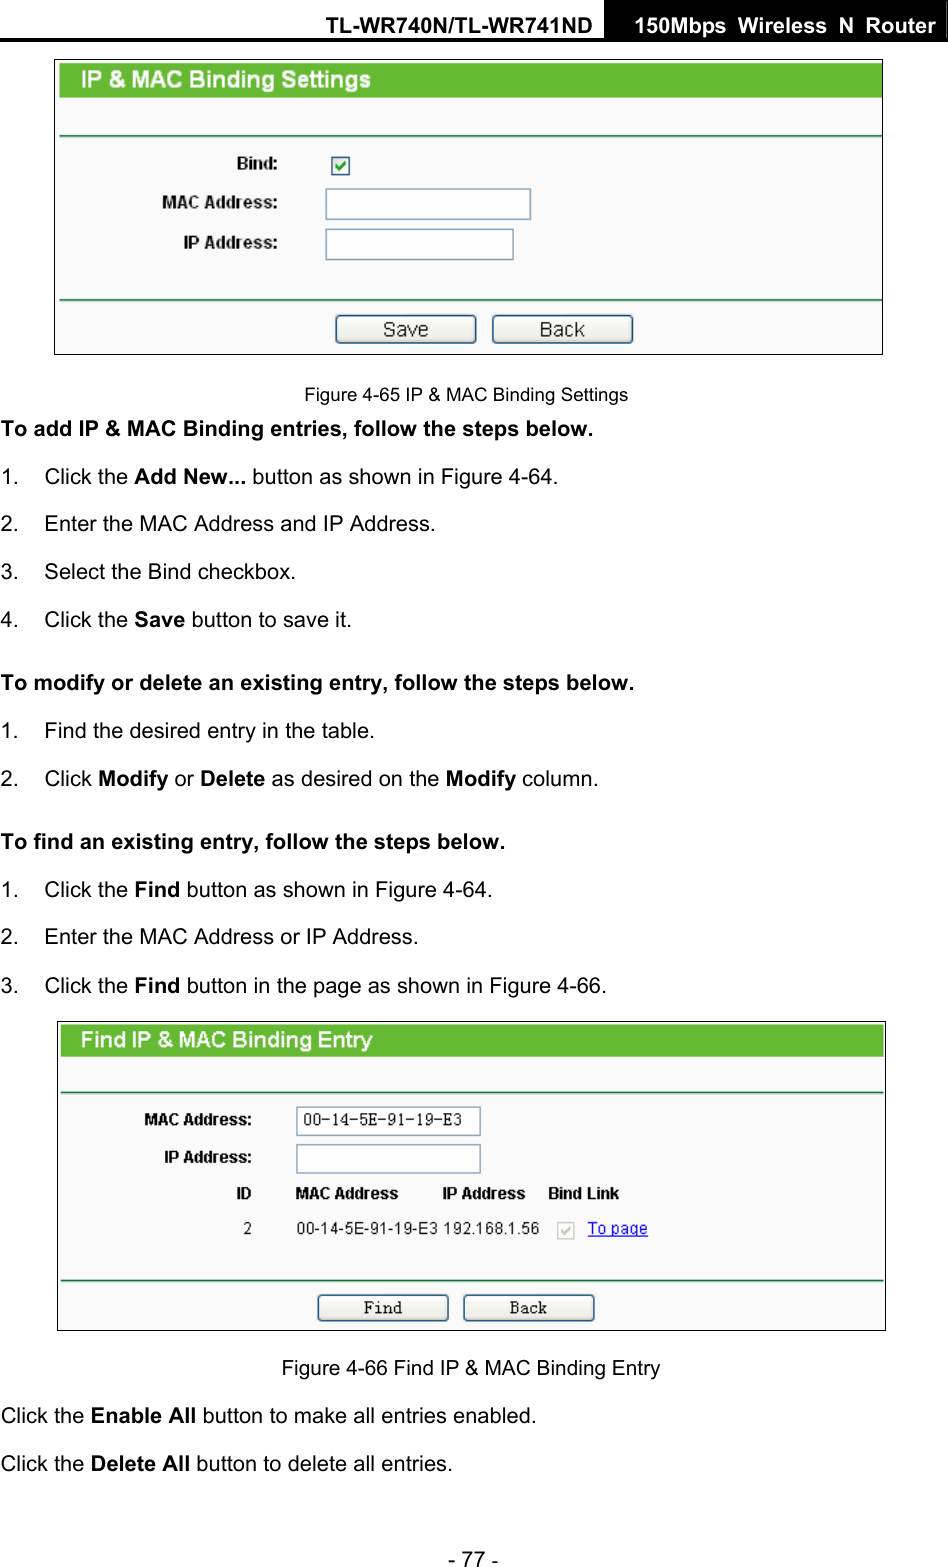 TL-WR740N/TL-WR741ND 150Mbps Wireless N Router - 77 -   Figure 4-65 IP &amp; MAC Binding Settings To add IP &amp; MAC Binding entries, follow the steps below. 1. Click the Add New... button as shown in Figure 4-64.  2.  Enter the MAC Address and IP Address. 3.  Select the Bind checkbox.   4. Click the Save button to save it. To modify or delete an existing entry, follow the steps below. 1.  Find the desired entry in the table.   2. Click Modify or Delete as desired on the Modify column.   To find an existing entry, follow the steps below. 1. Click the Find button as shown in Figure 4-64. 2.  Enter the MAC Address or IP Address. 3. Click the Find button in the page as shown in Figure 4-66.  Figure 4-66 Find IP &amp; MAC Binding Entry Click the Enable All button to make all entries enabled. Click the Delete All button to delete all entries. 